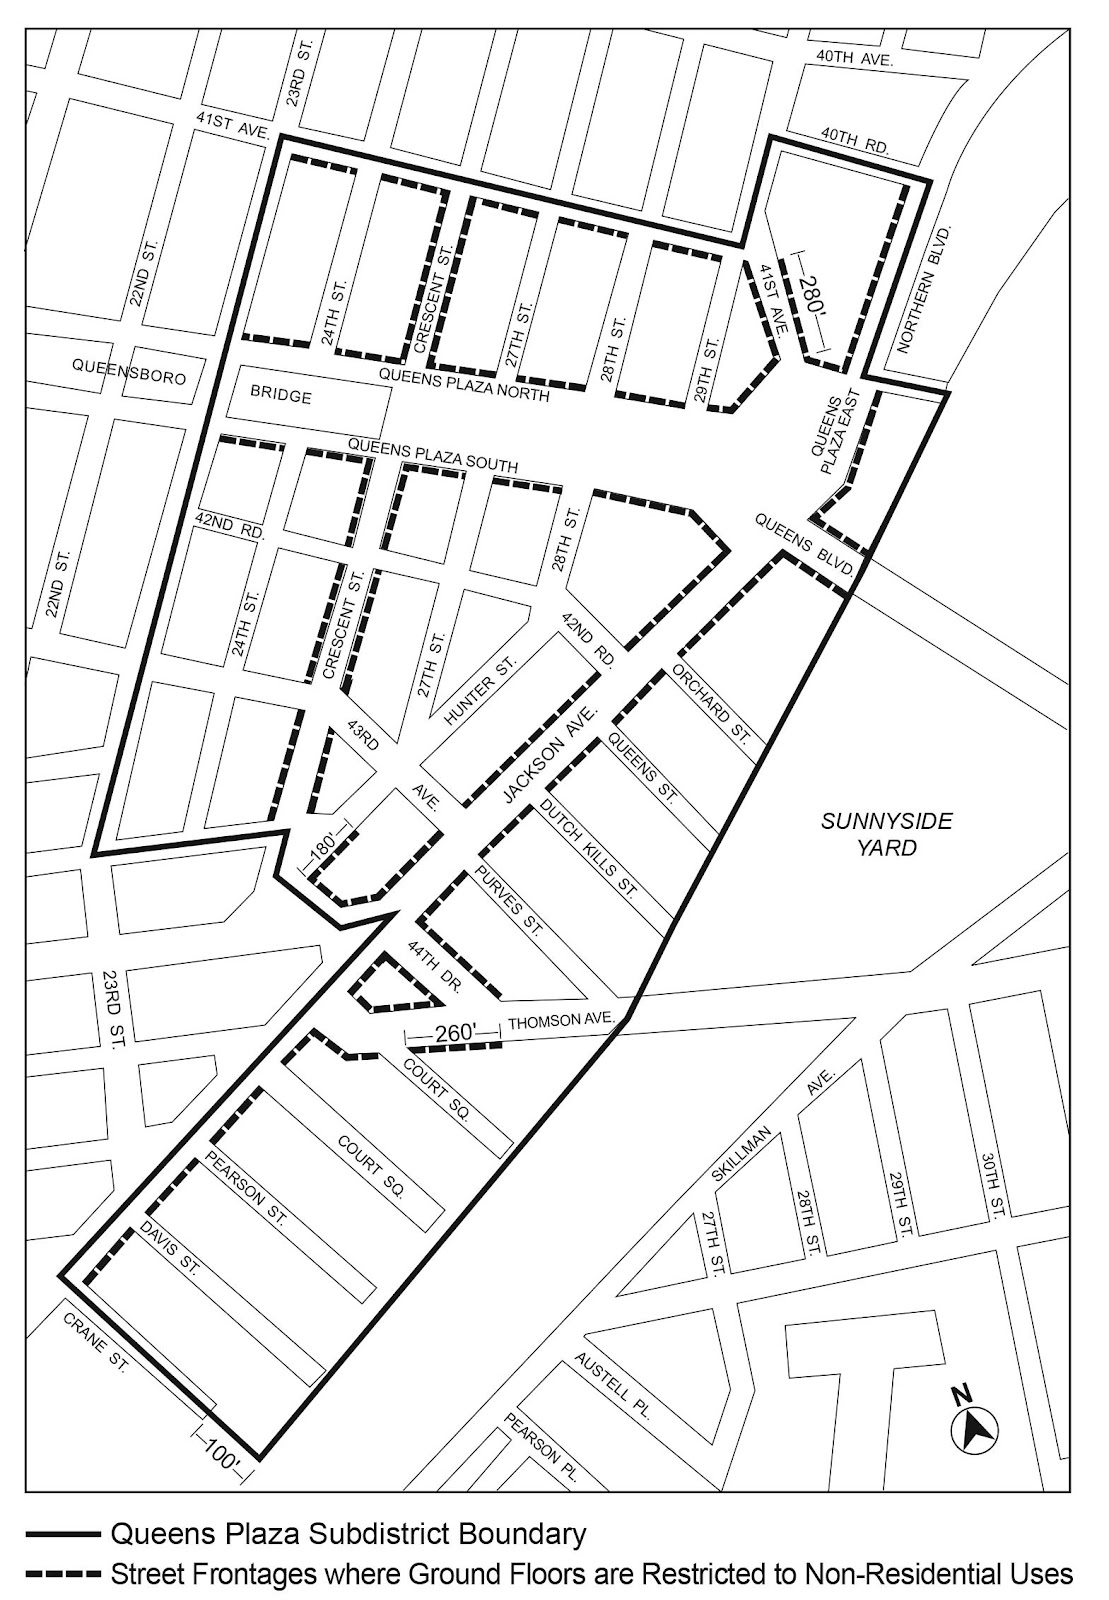 Zoning Resolutions Chapter 7: Special Long Island City Mixed Use District Appendix C.1